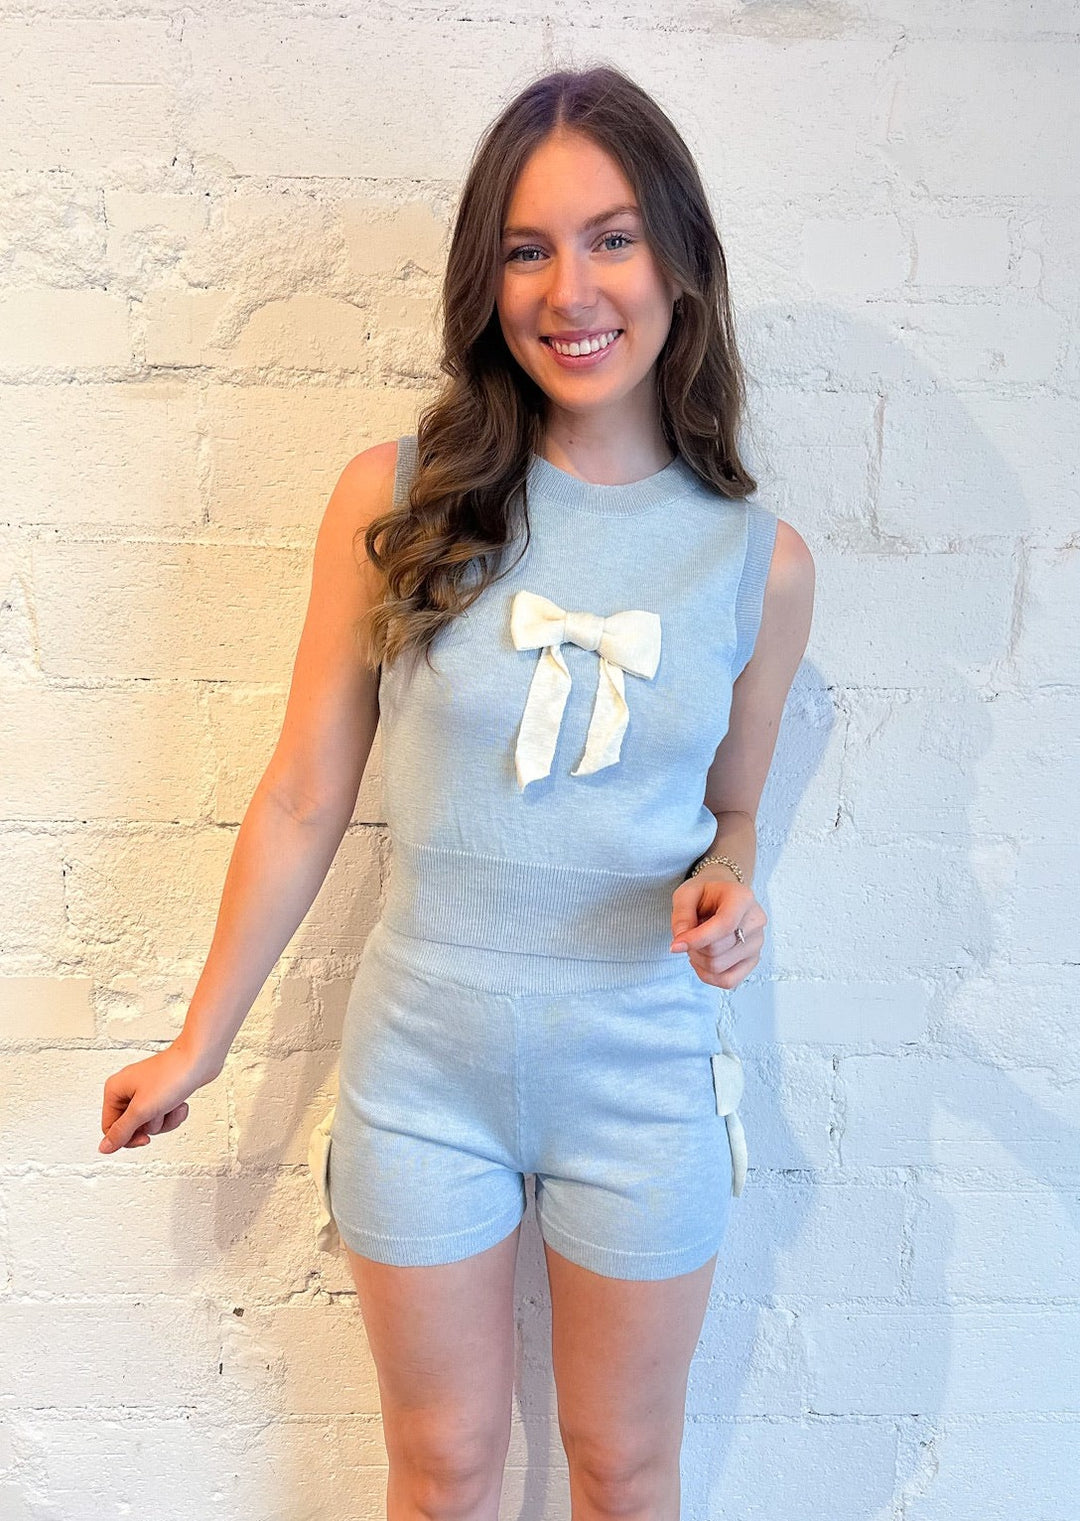 Bows and Blues Shorts, Shorts, Adeline, Adeline, dallas boutique, dallas texas, texas boutique, women's boutique dallas, adeline boutique, dallas boutique, trendy boutique, affordable boutique